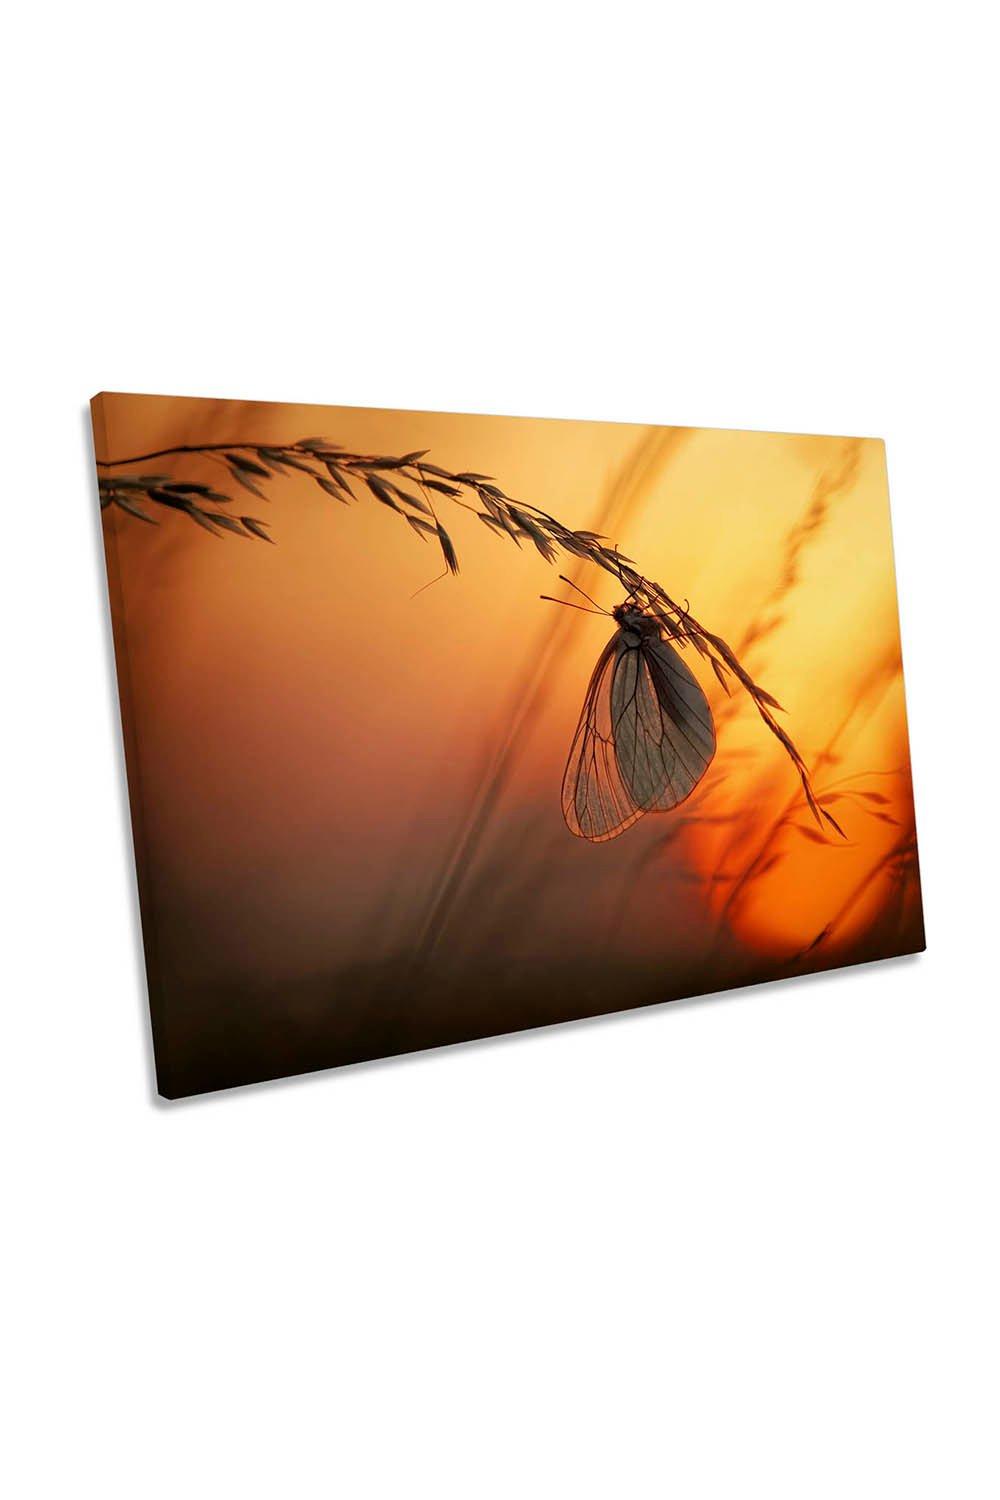 Good Night Sunset Butterfly Orange Canvas Wall Art Picture Print